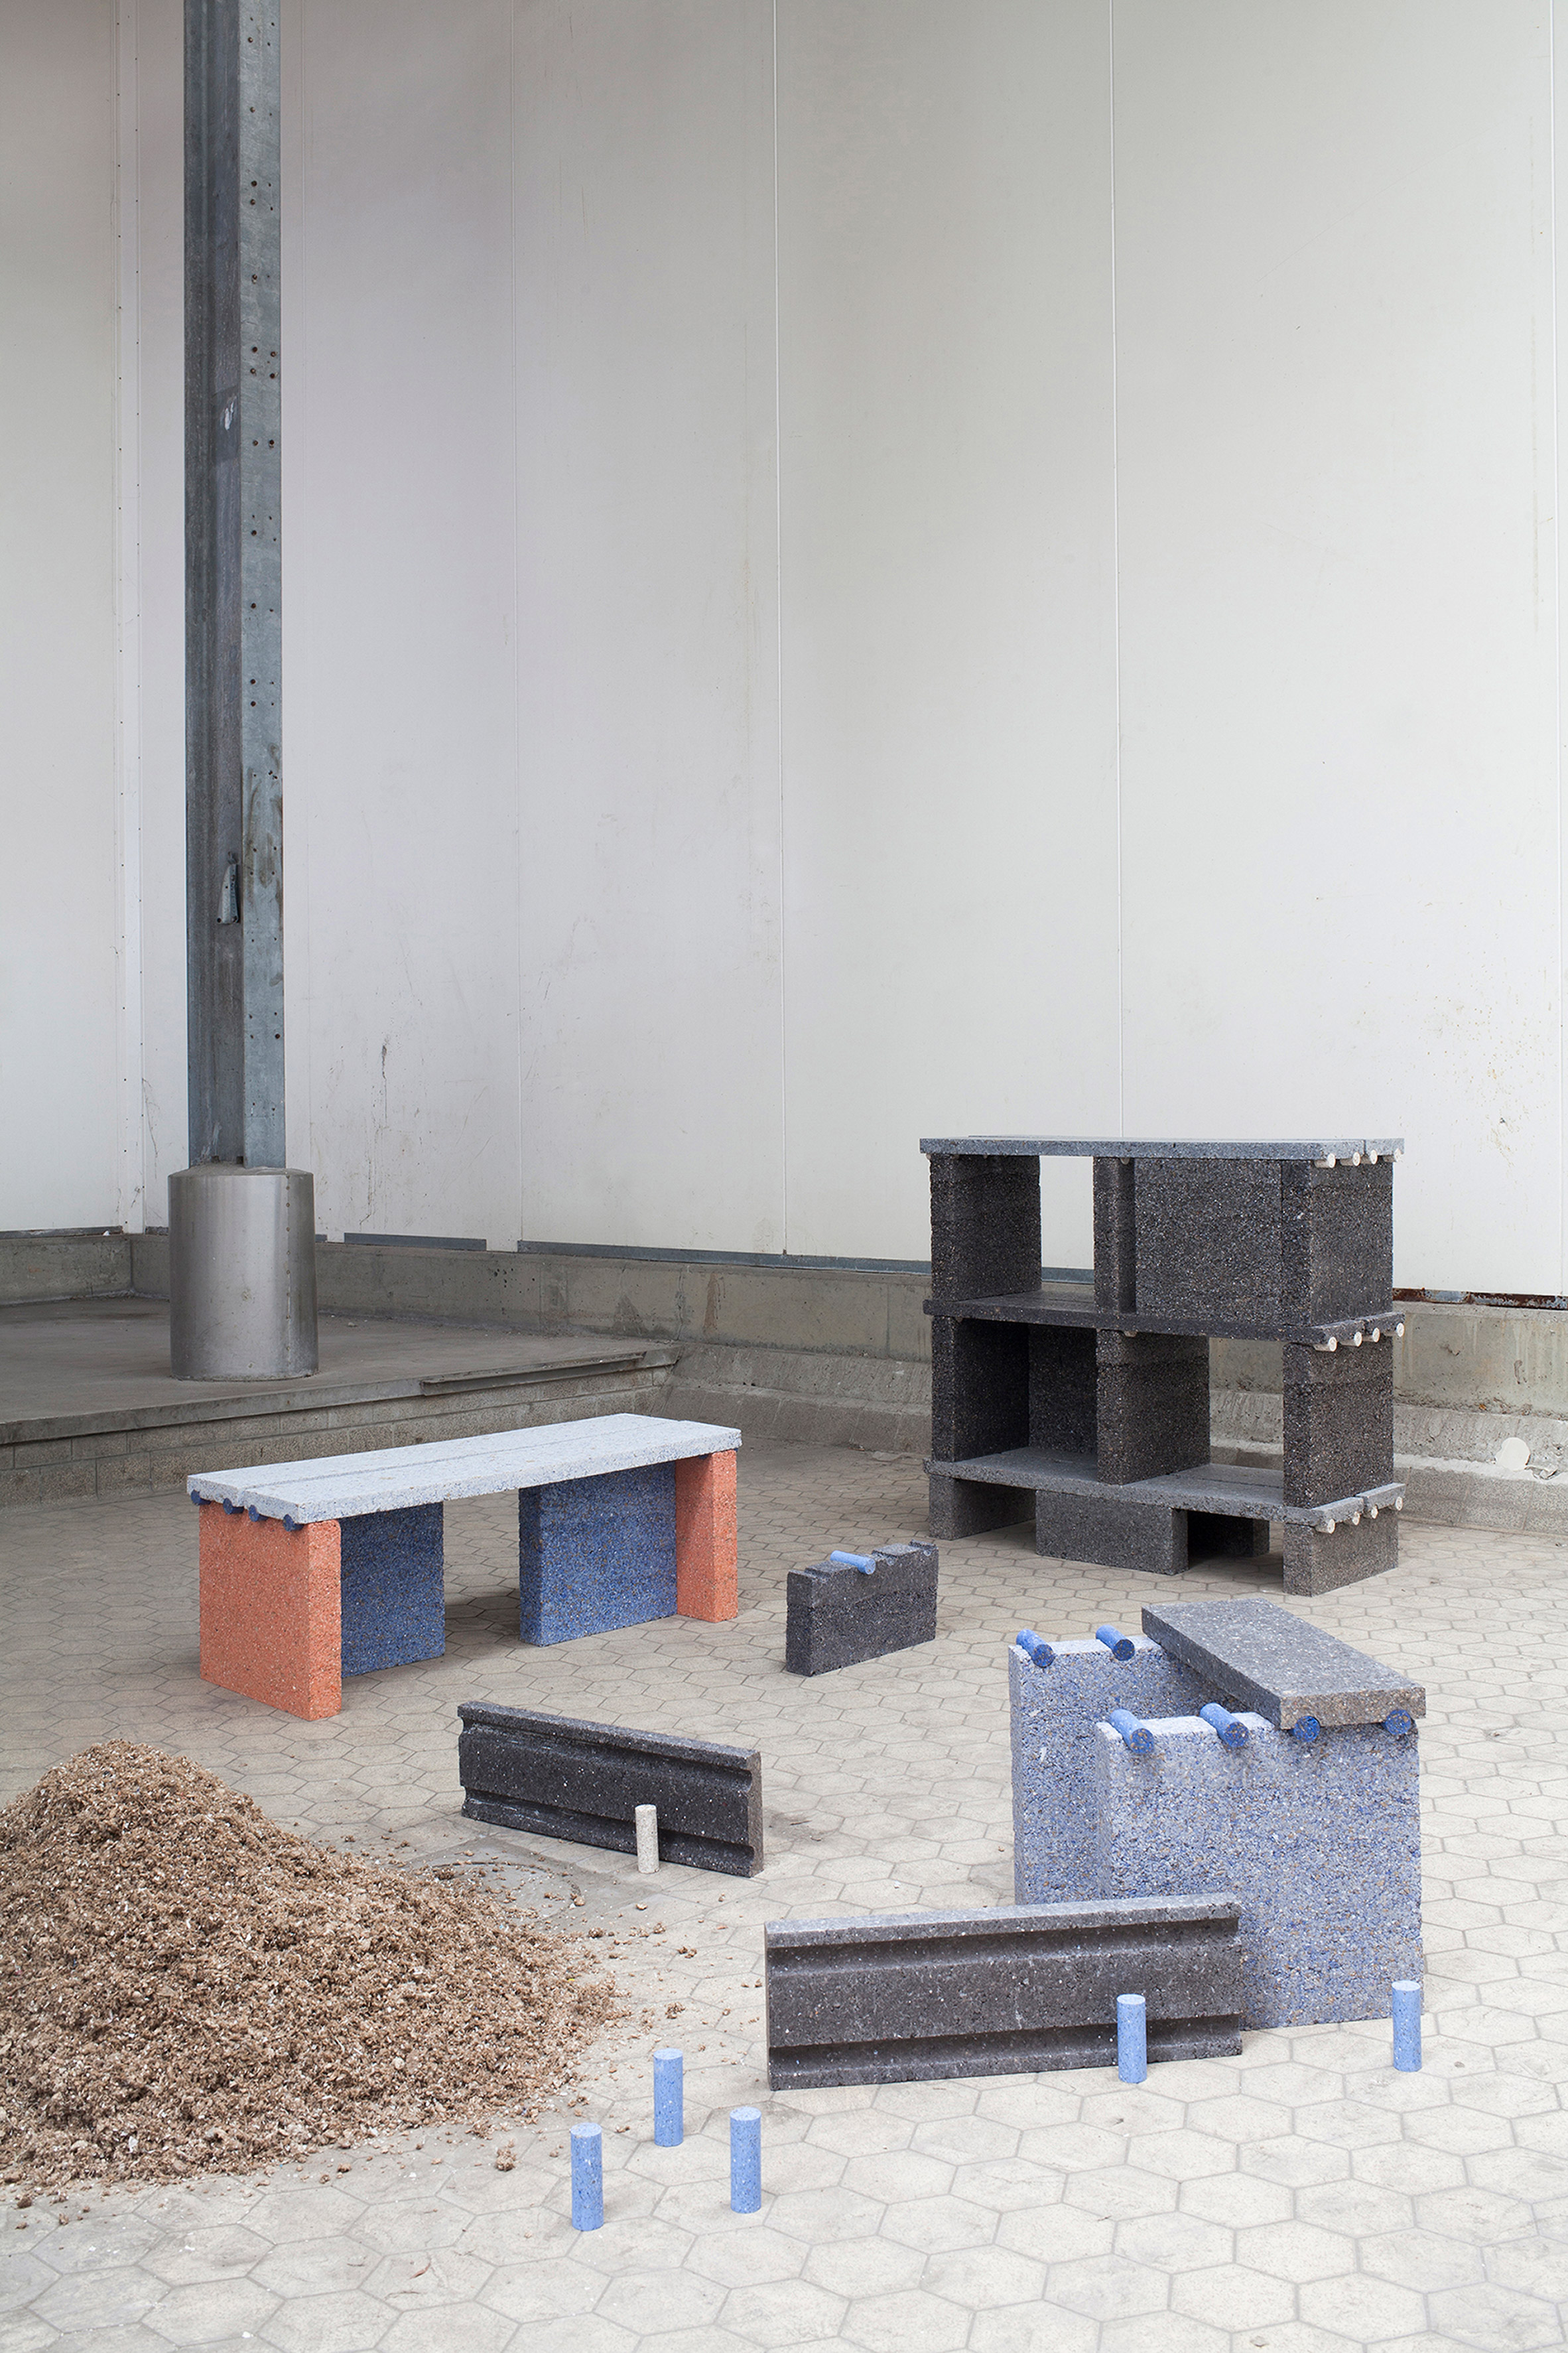 Tim Teven creates Recycling Reject furniture from paper-recycling waste